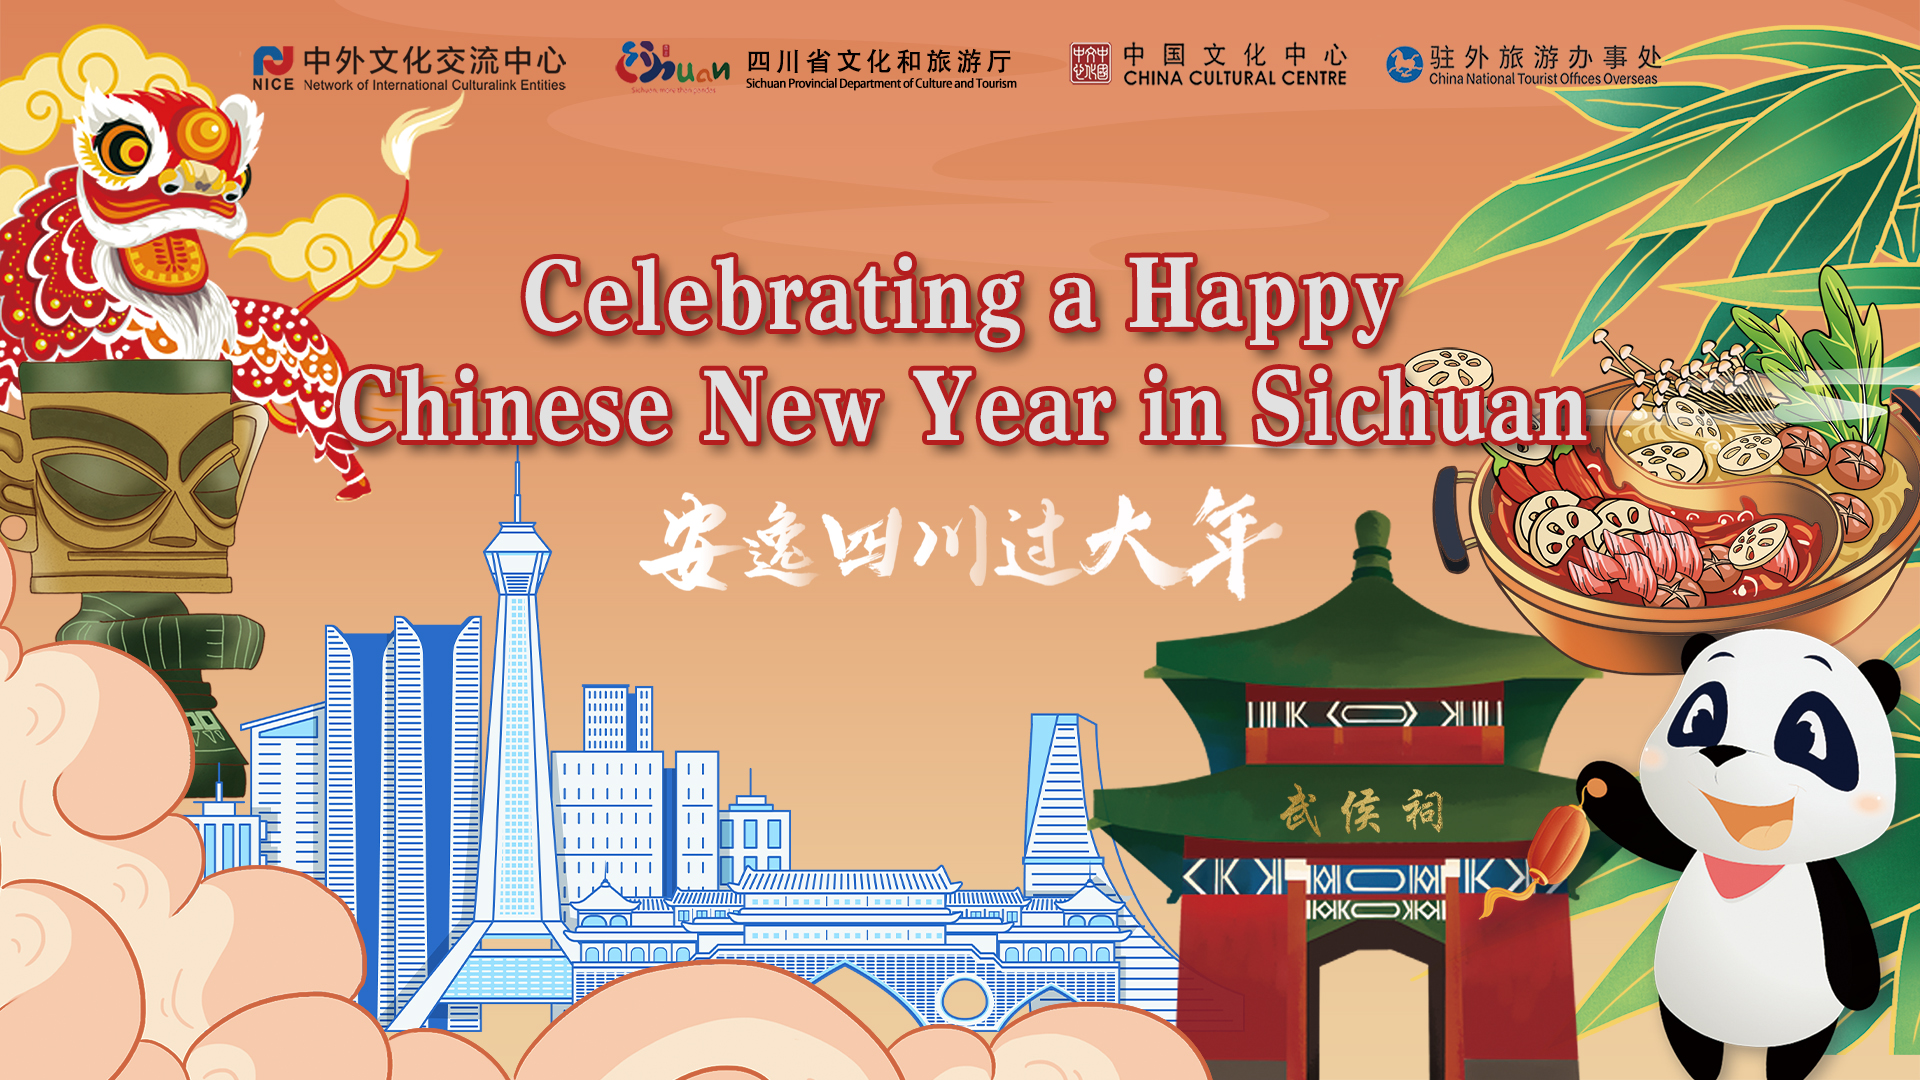 Celebrating a Happy Chinese New Year in Sichuan